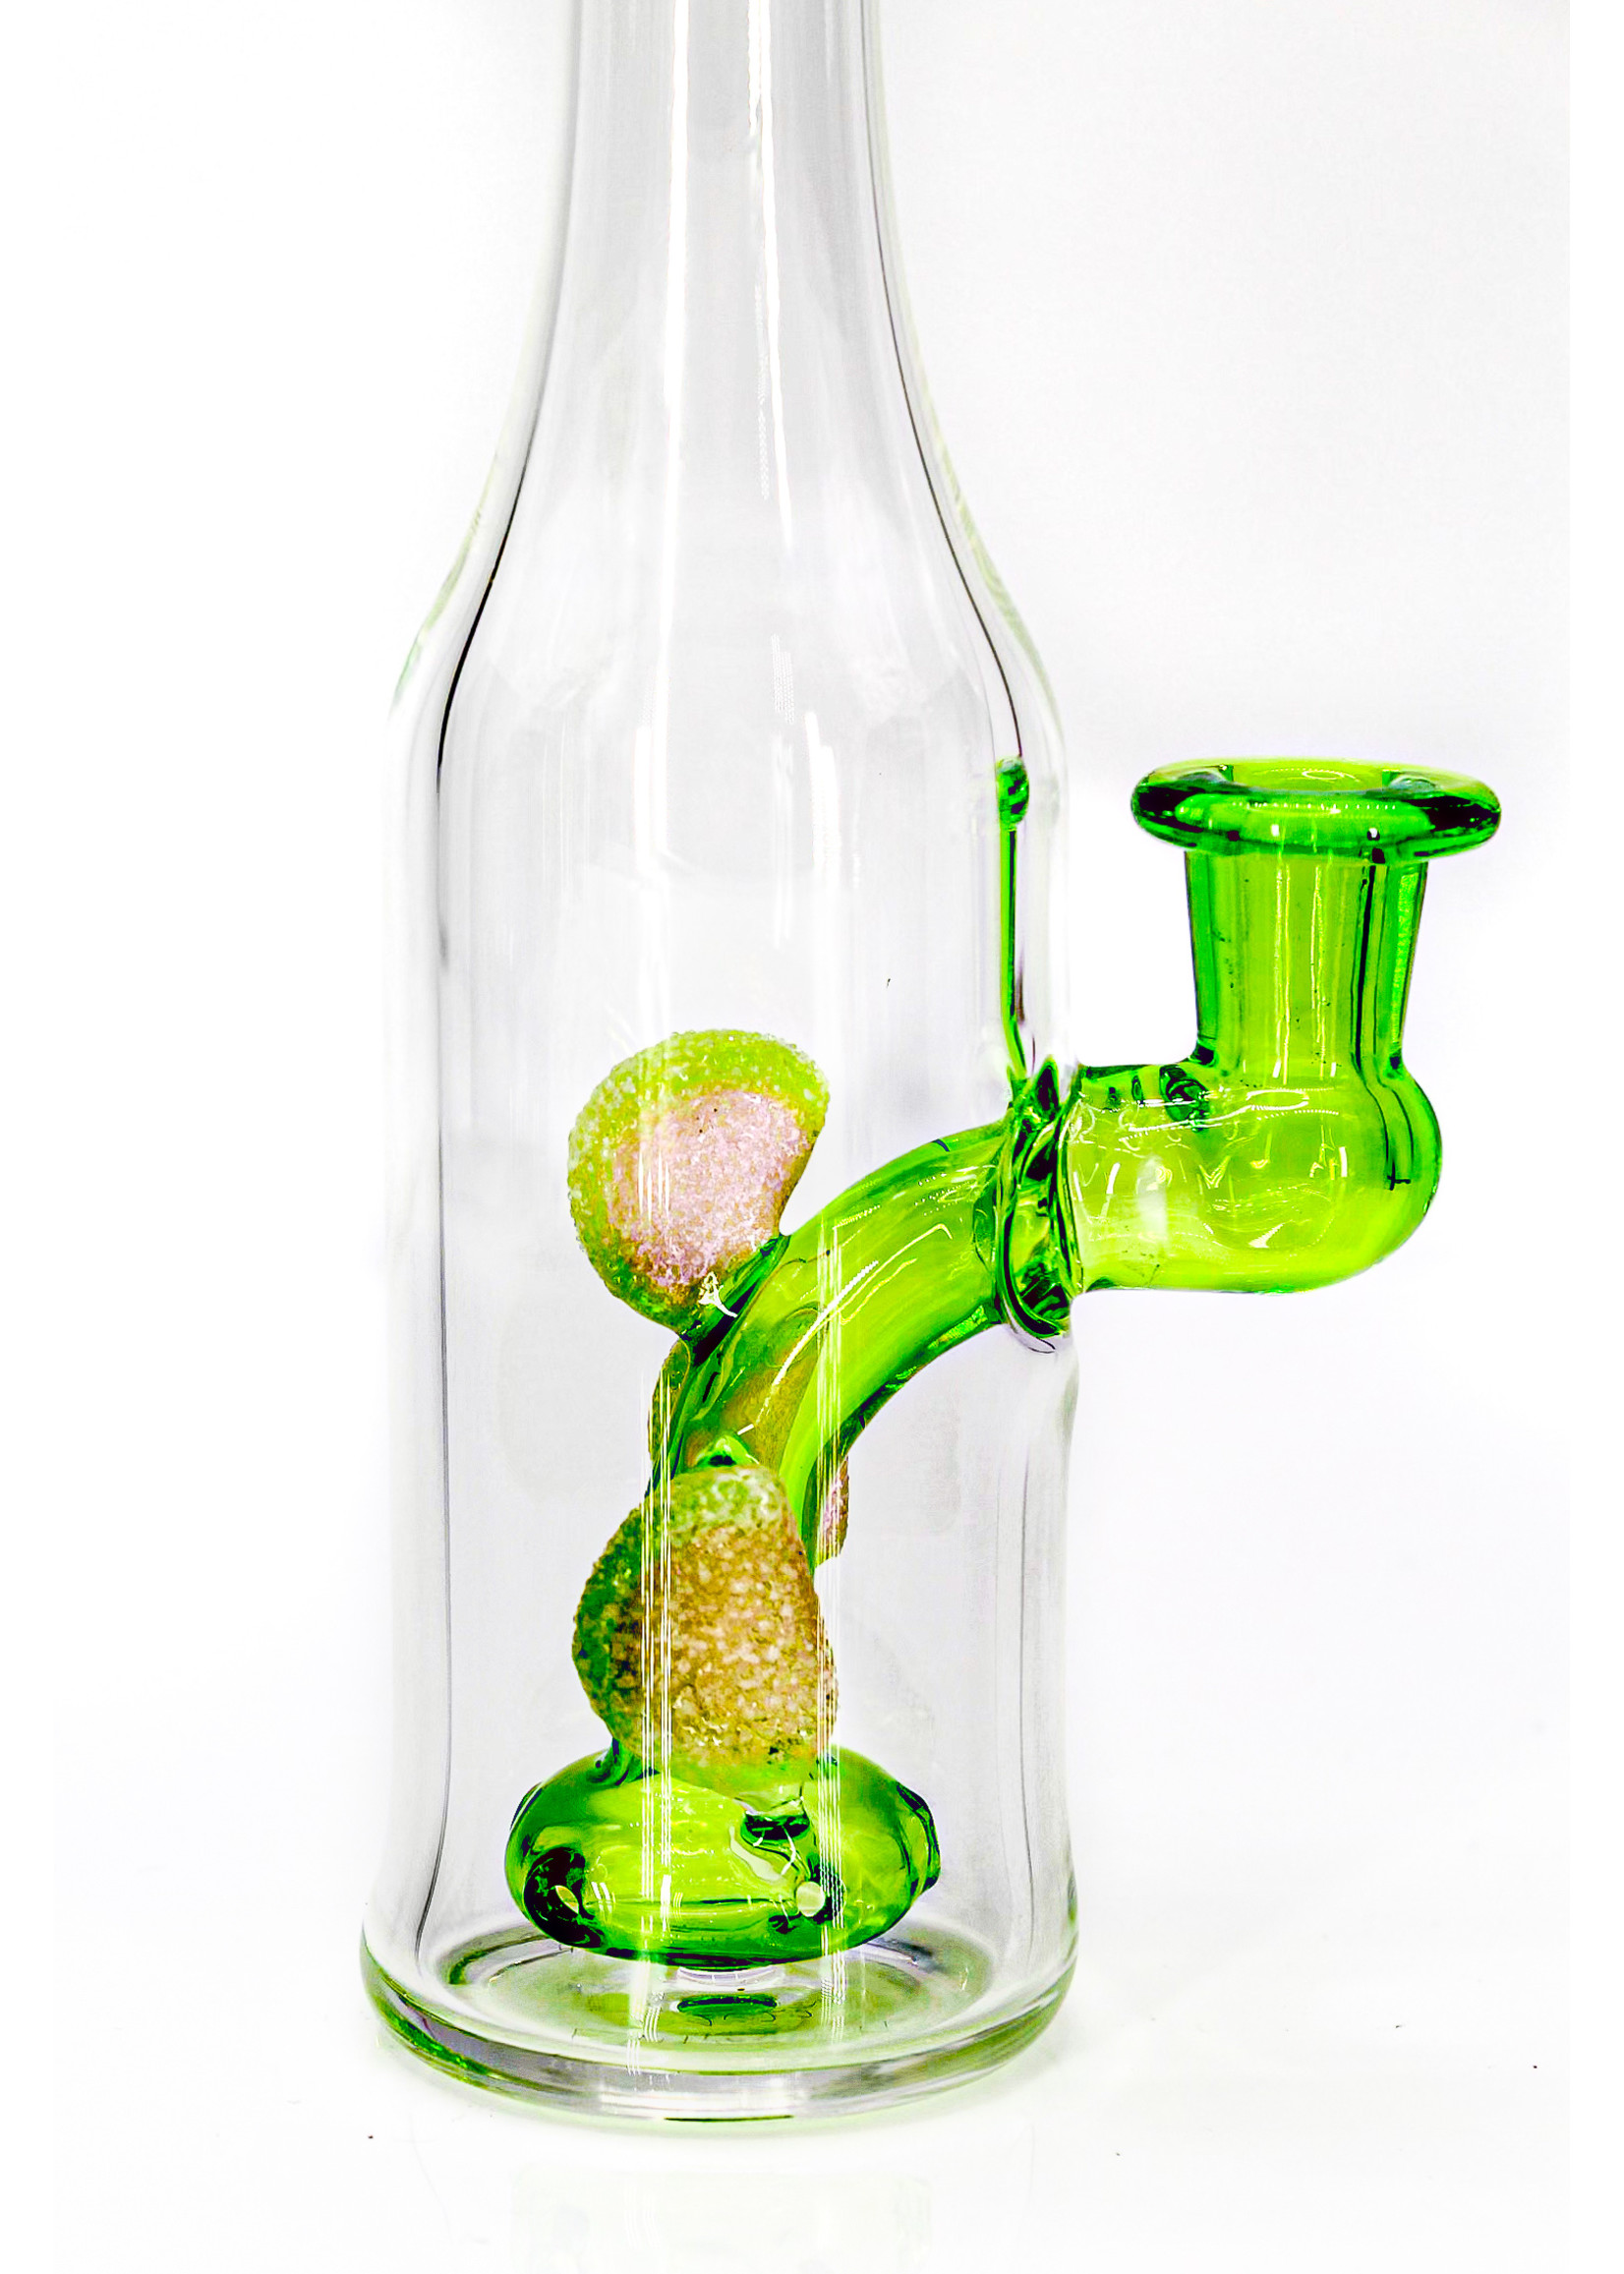 Emperial Glass Emperial Glass Bottle Rig #5 2022